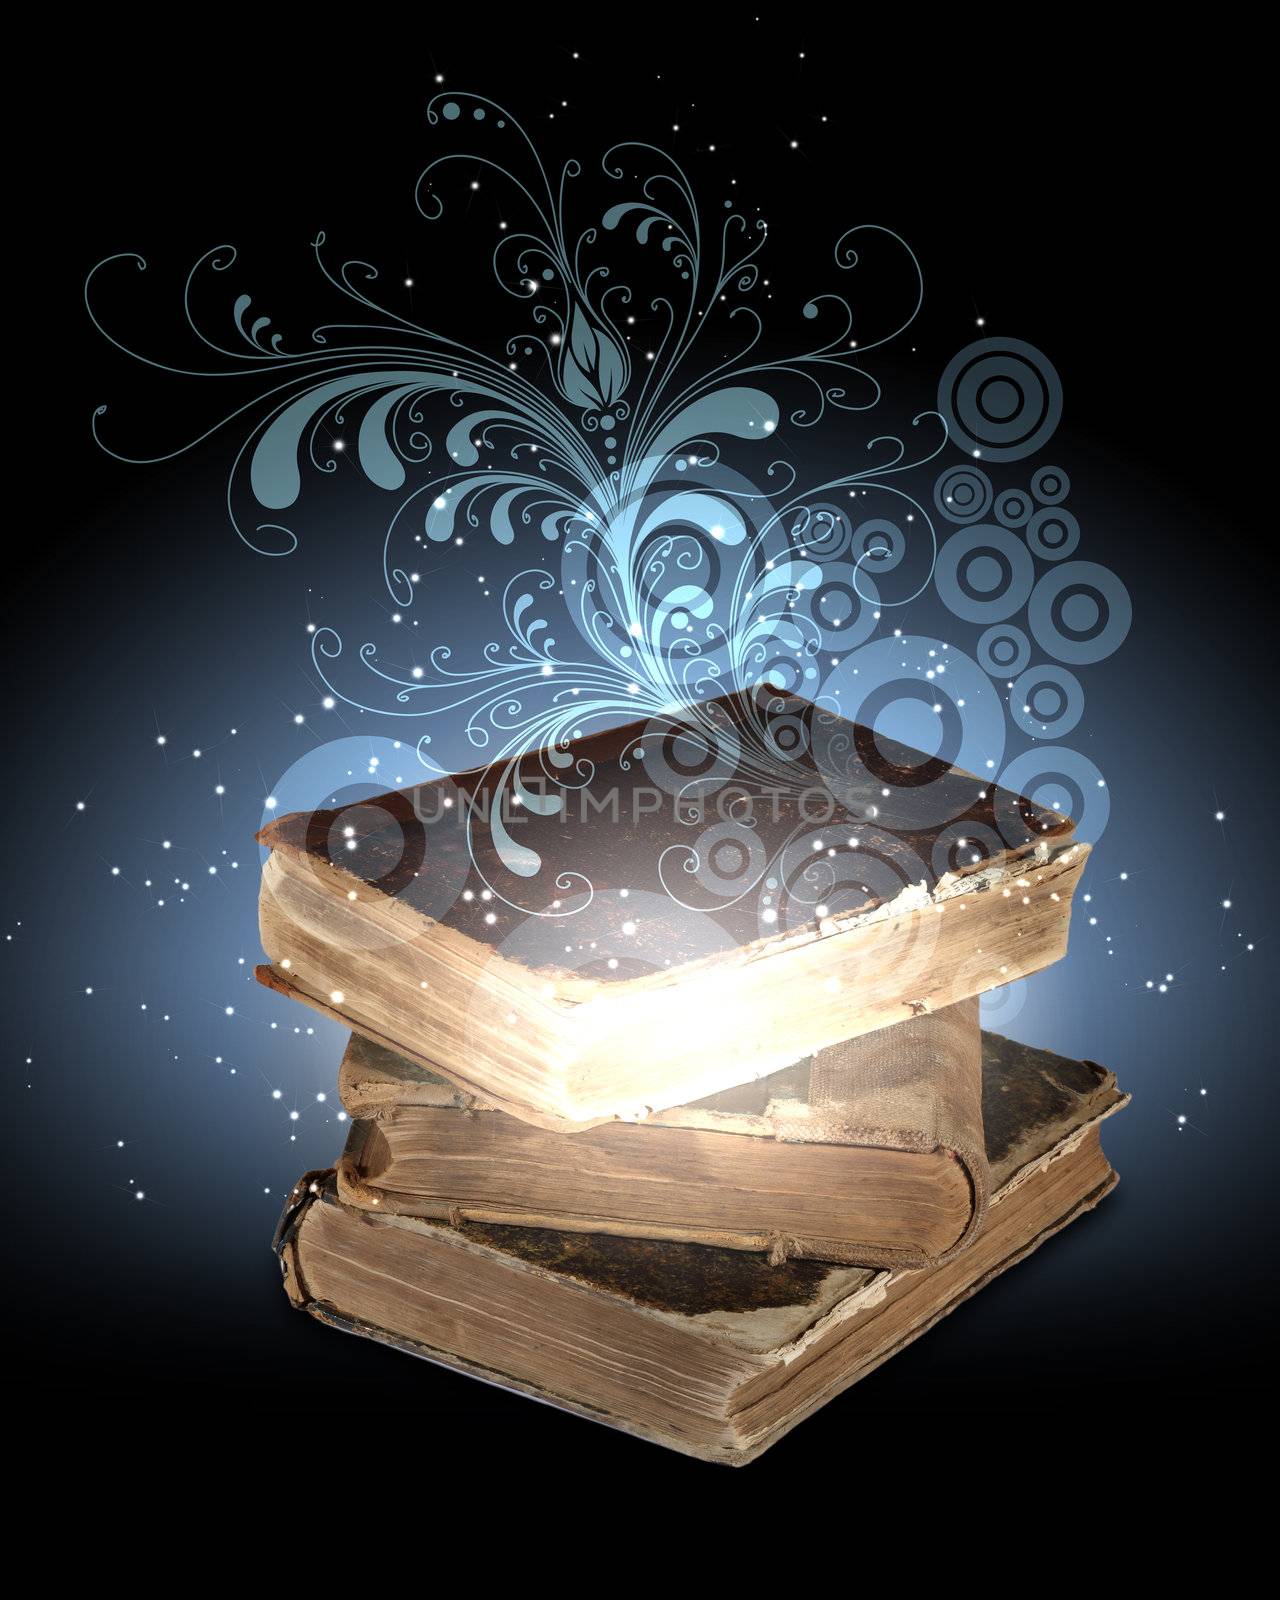 Magic book with light coming from inside it